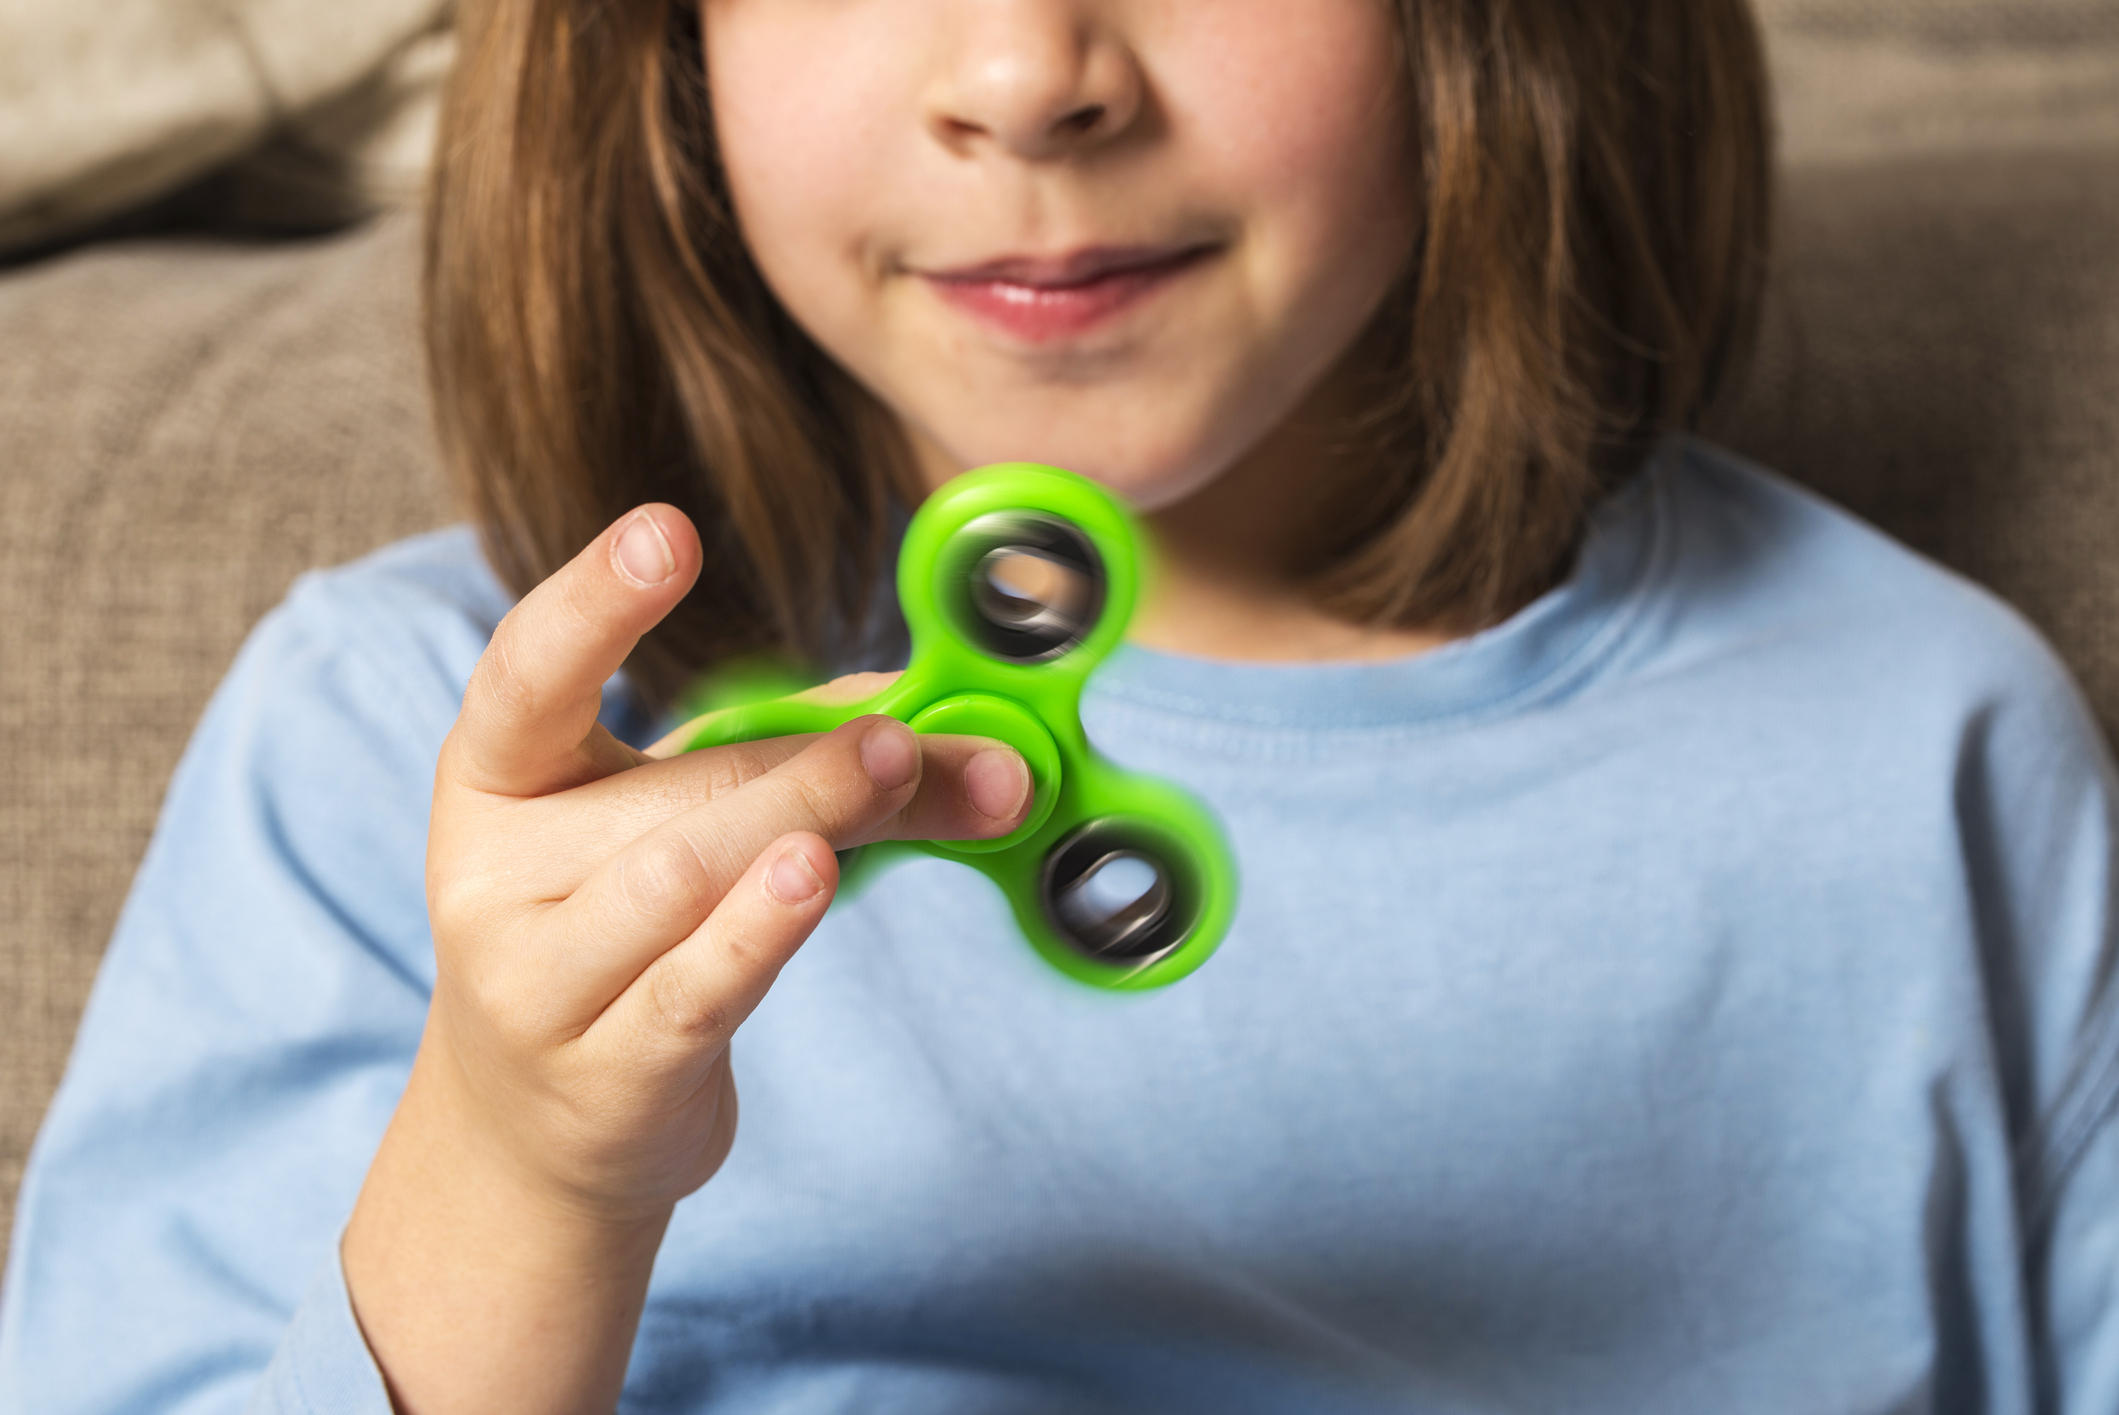 Fidget spinners pose threat to kids, watchdog group says - CBS News